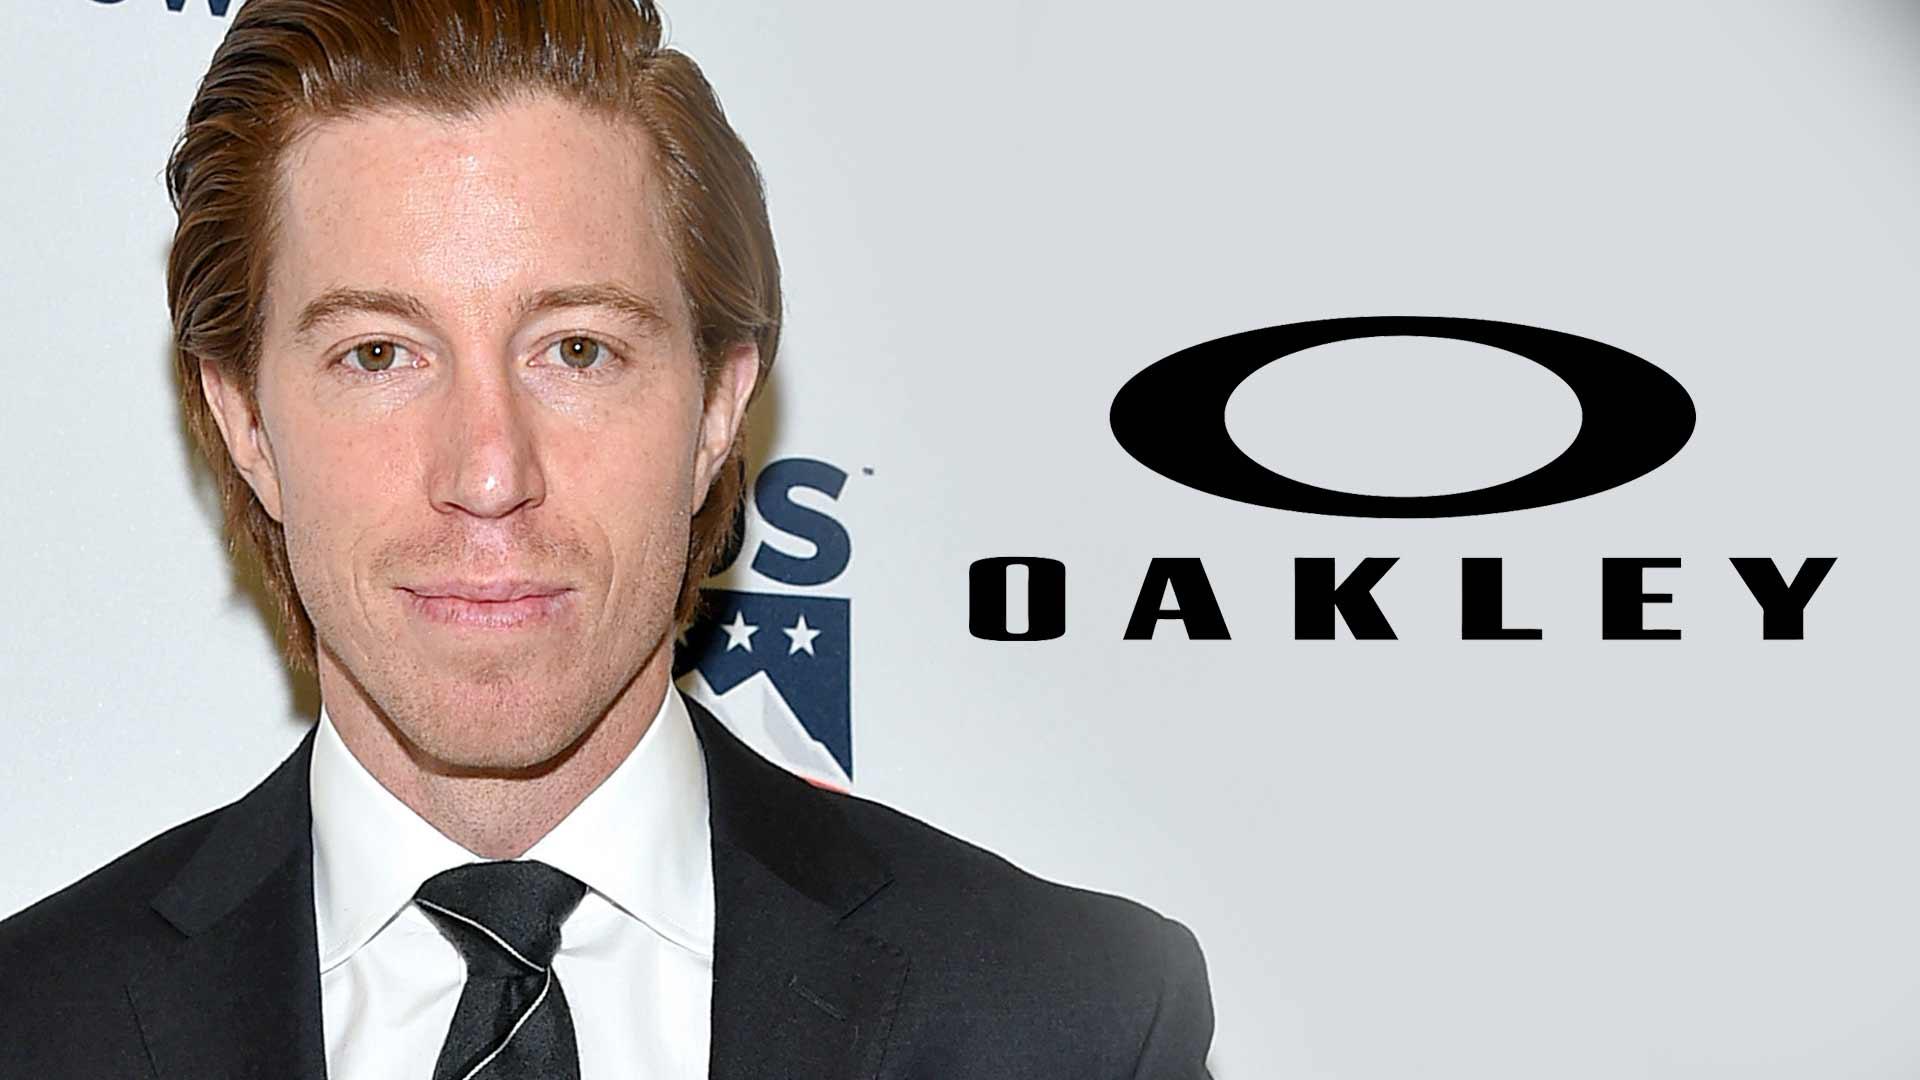 Shaun White Sues Oakley for Allegedly Using Him to Promote Sunglasses After Their Deal Expired